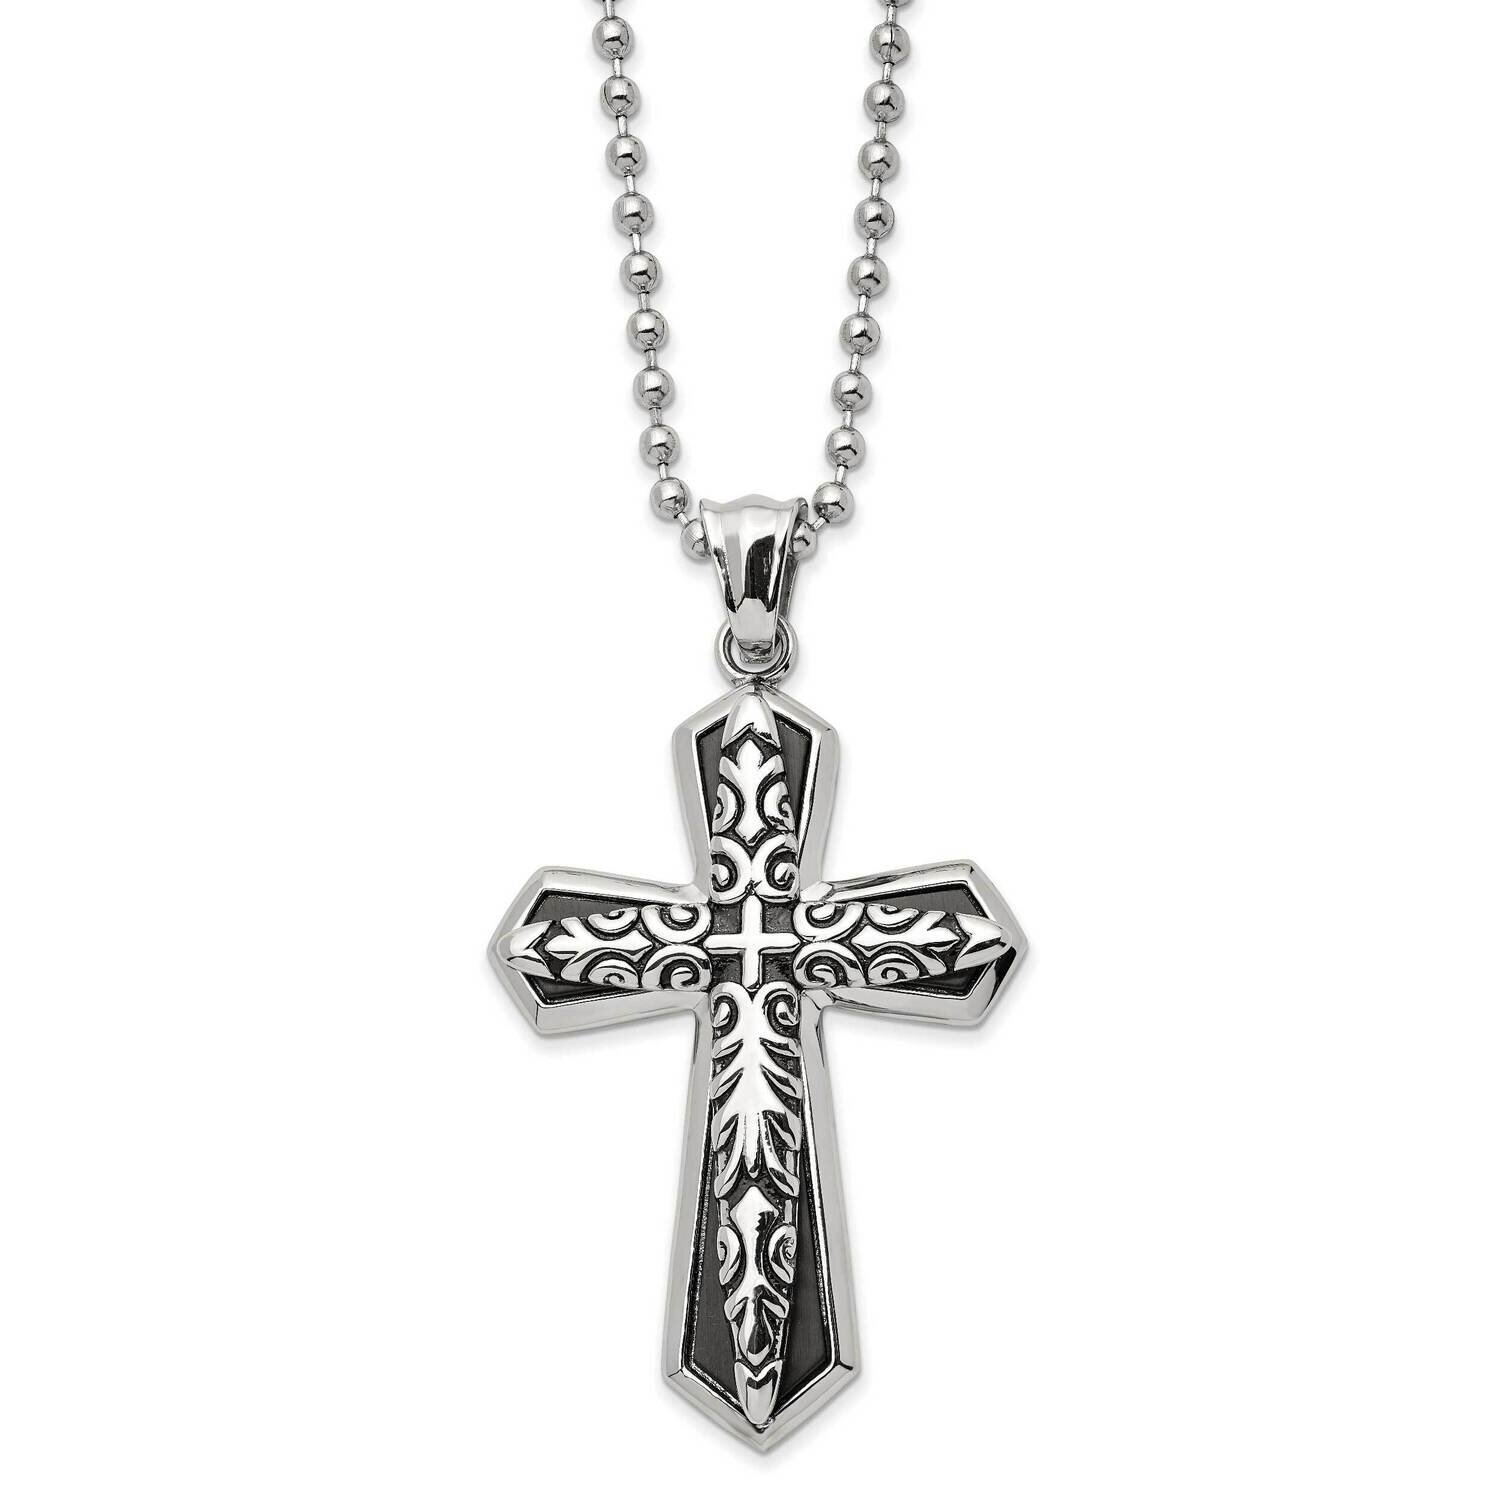 Antiqued and Polished Black Ip-Plated Cross 22 Inch Necklace Stainless Steel SRN2994-22